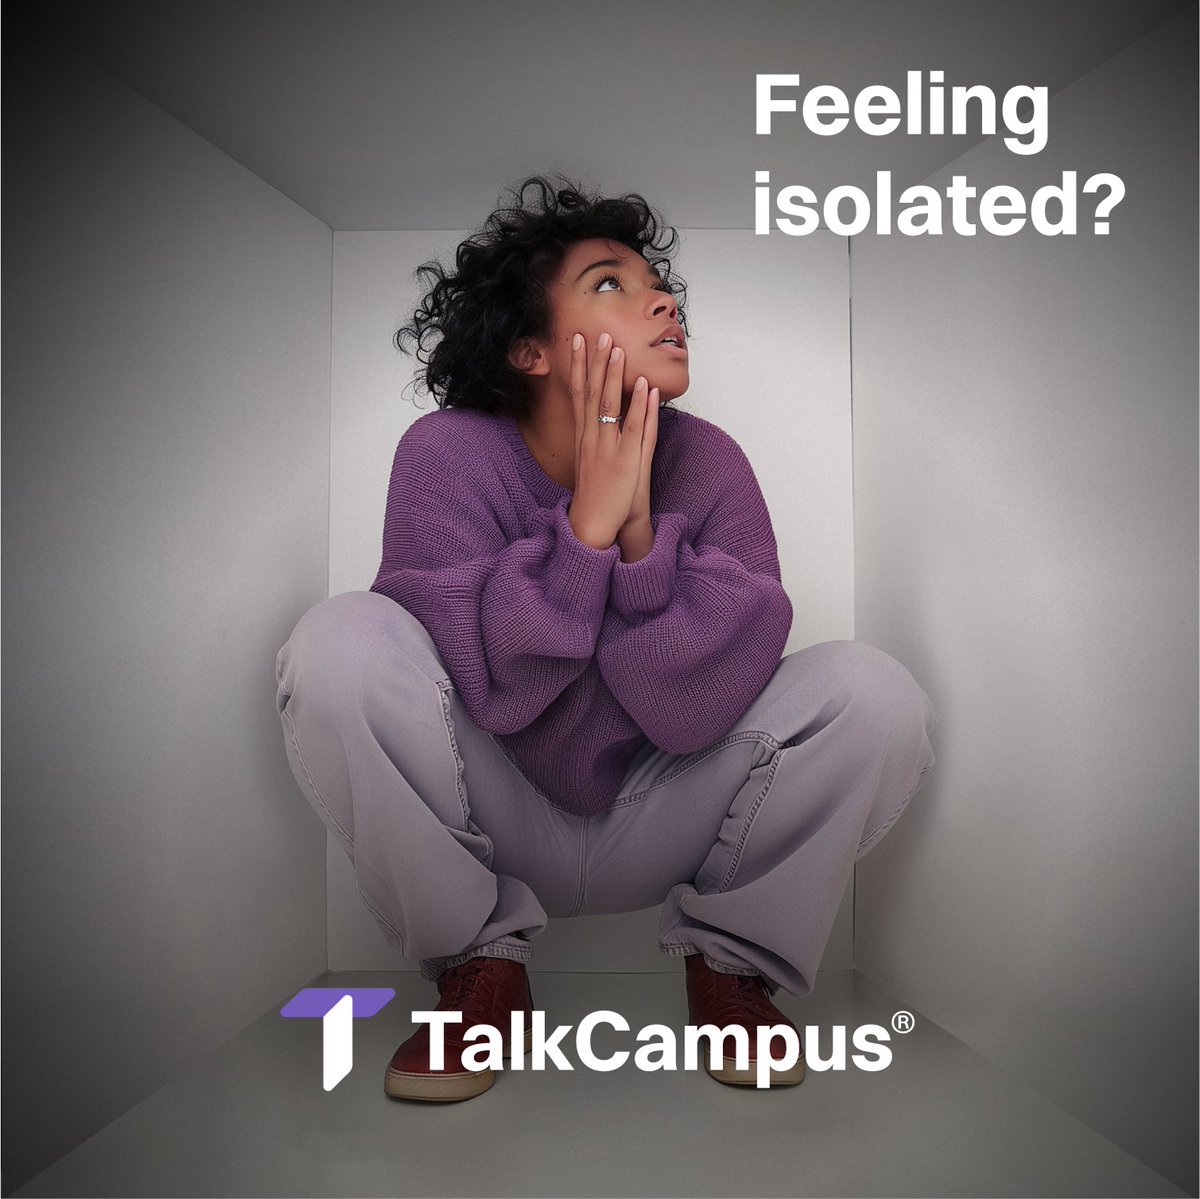 Feeling isolated this #MentalHealthAwarenessWeek? Wirral Met students can gain free access to TalkCampus, a resource which offers 24/7 safe, anonymous support for student mental health. Sign up with your student email at talkcampus.io/sign-up, or use invite code WIRRALMET